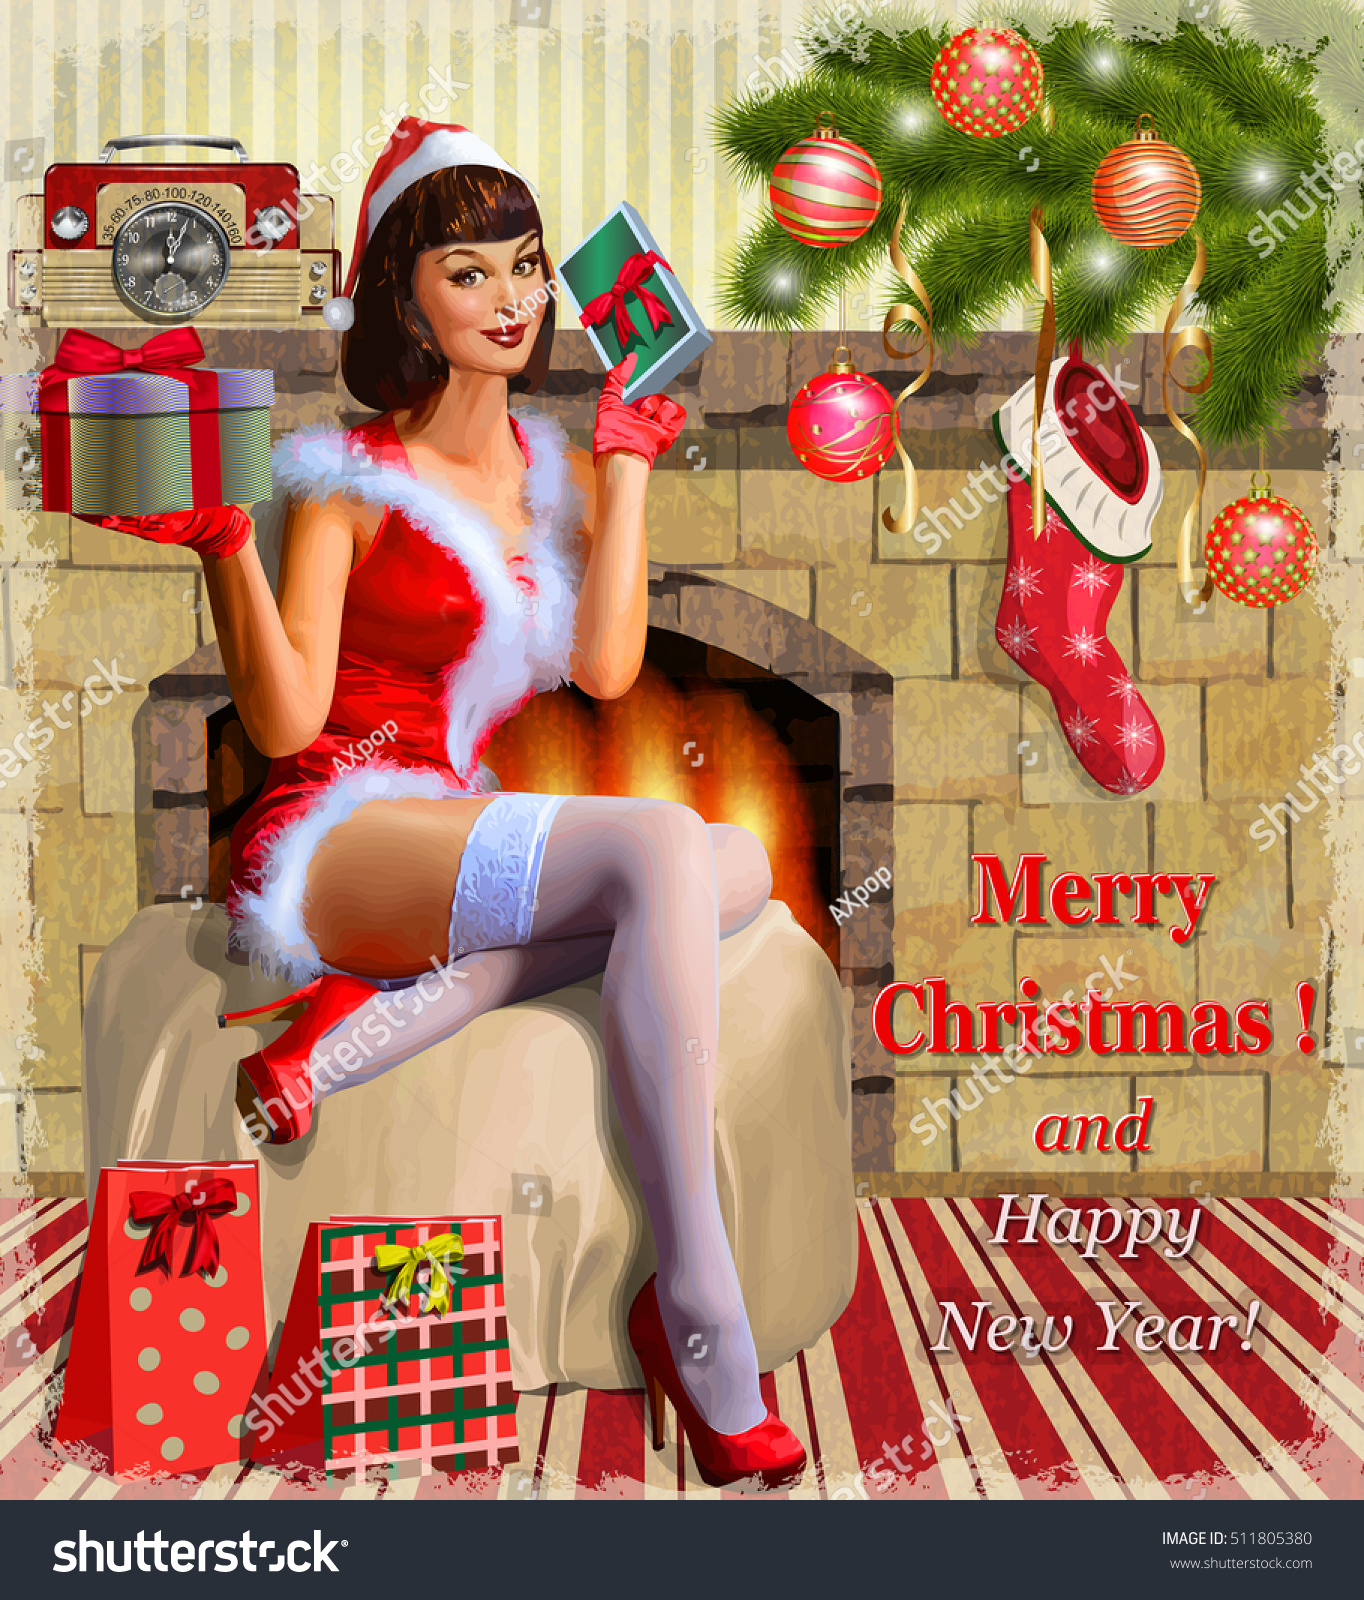 asaduzzaman sohag recommends Vintage Christmas Pin Up Girl Images